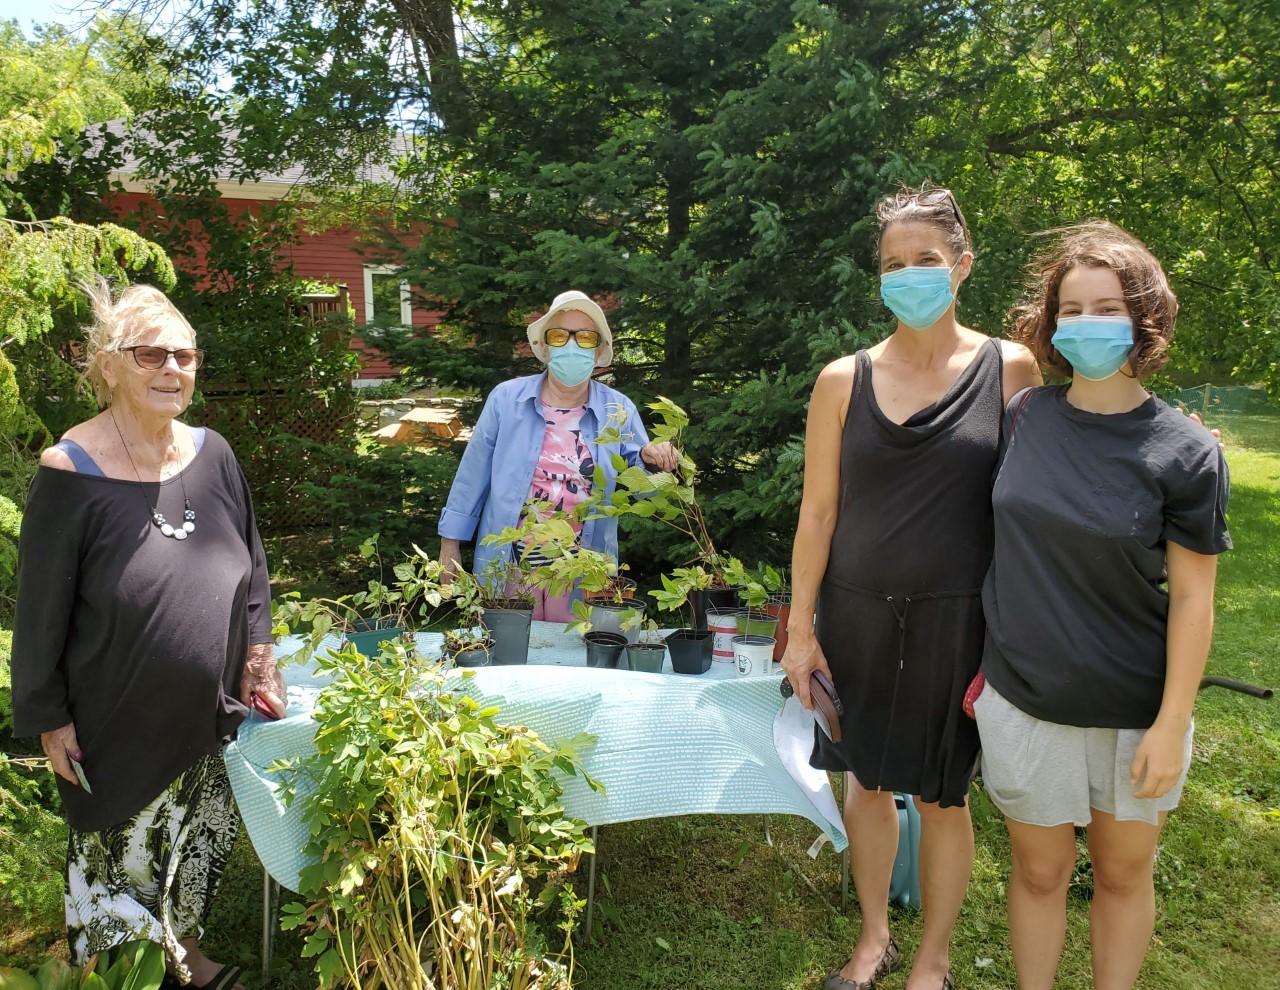 Annual plant sale to benefit Stephen Lewis Foundation